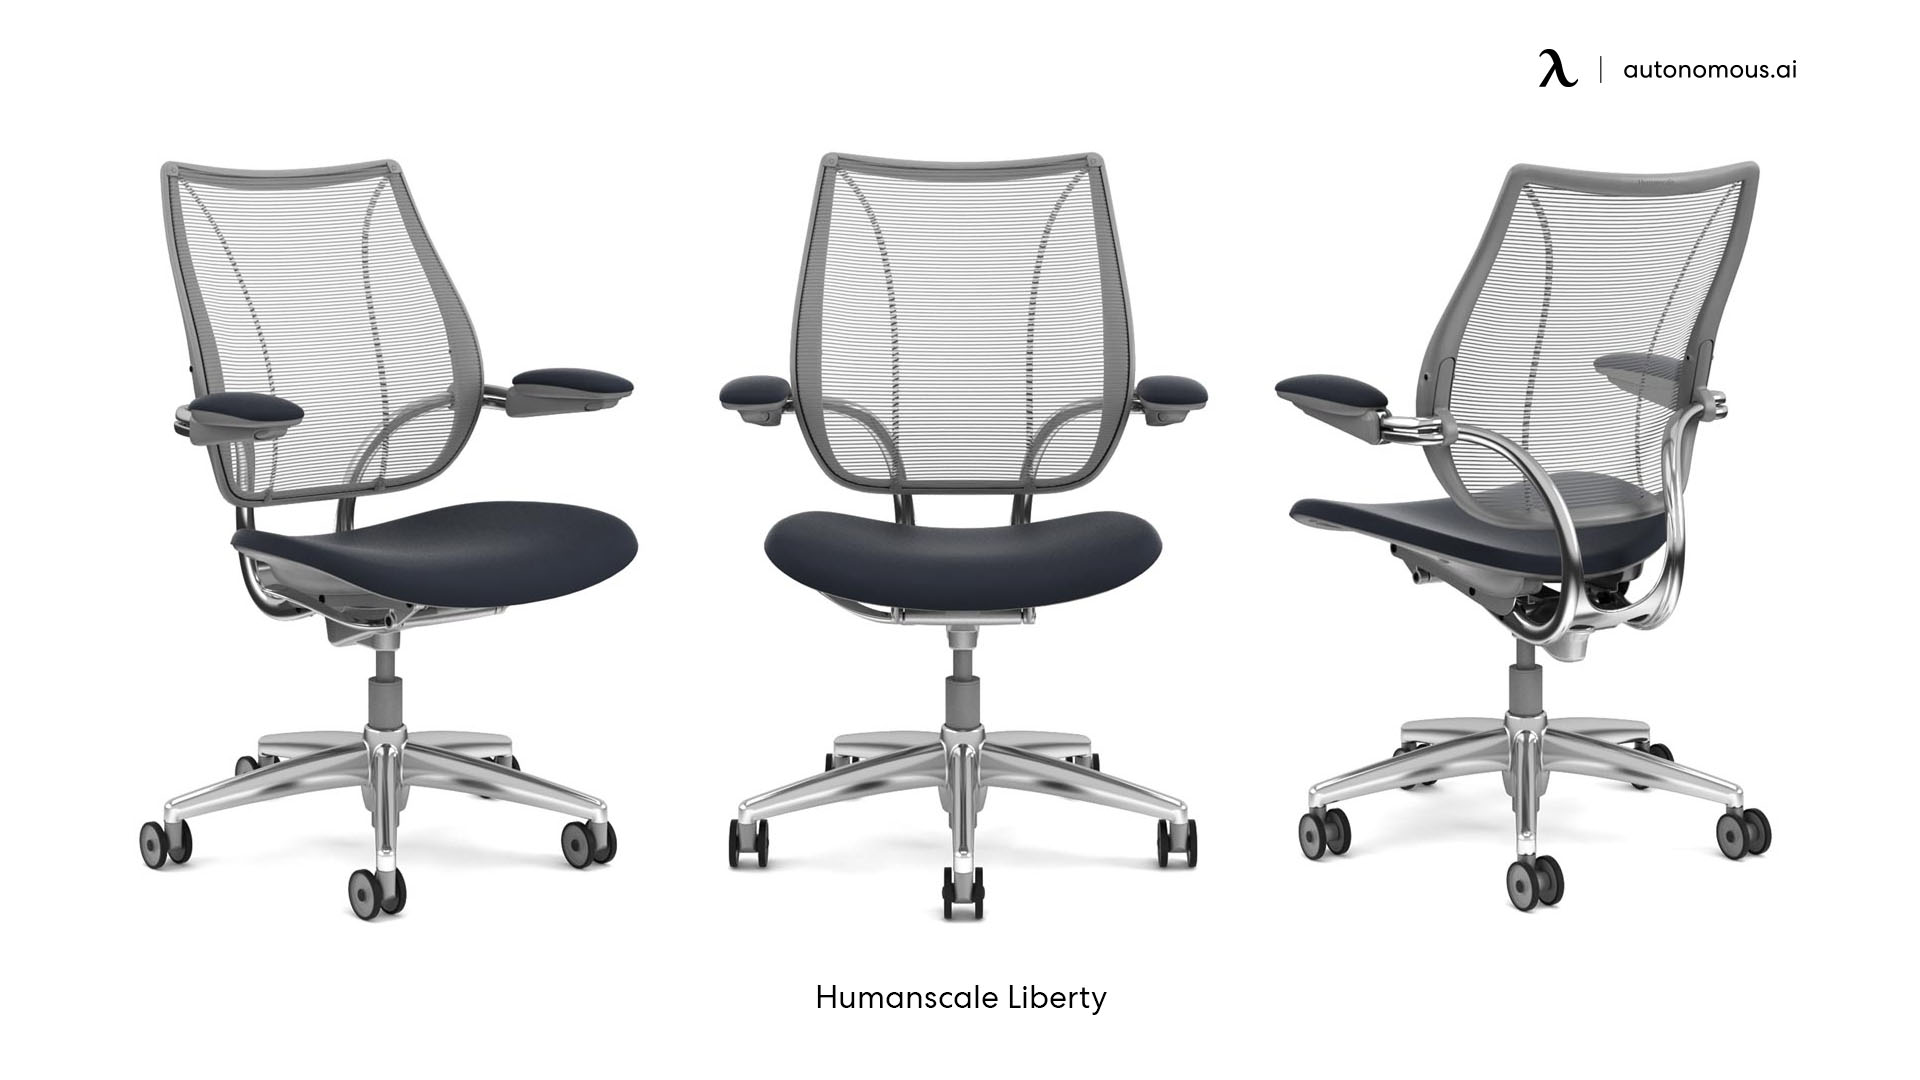 Humanscale Liberty grey desk chair with arms